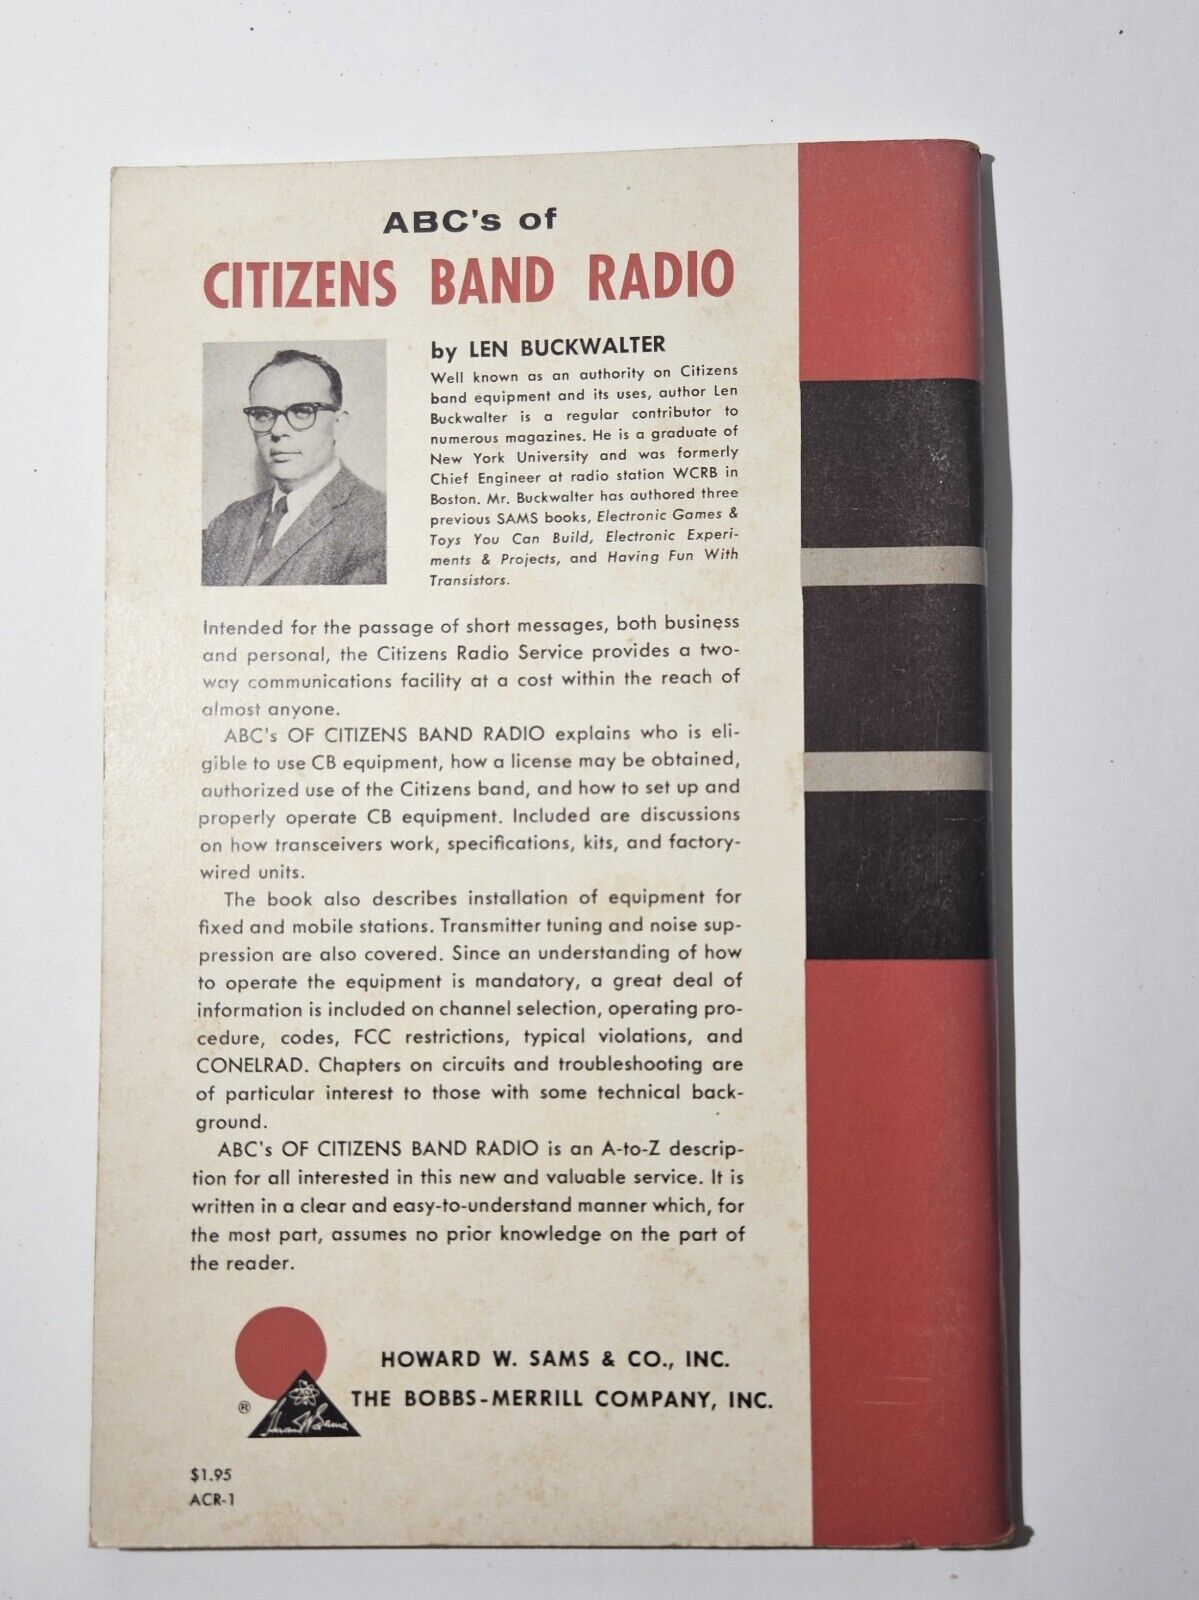  ABC'S OF CITIZENS BAND RADIO, 1st edition july 1962 - 96pgs  